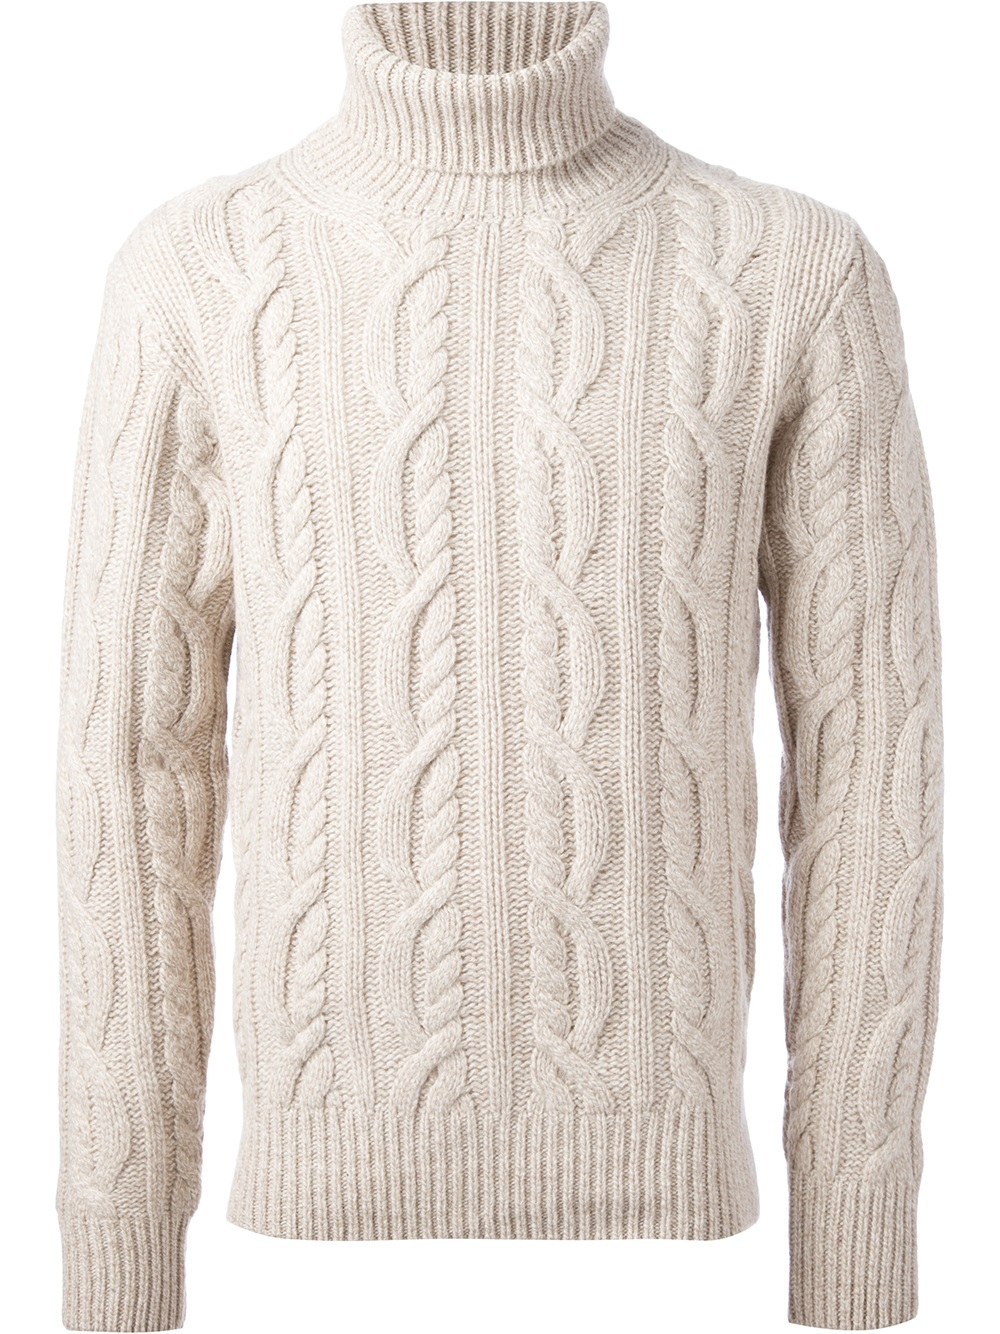 Lyst - Hackett Cable Knit Roll Neck Sweater in White for Men